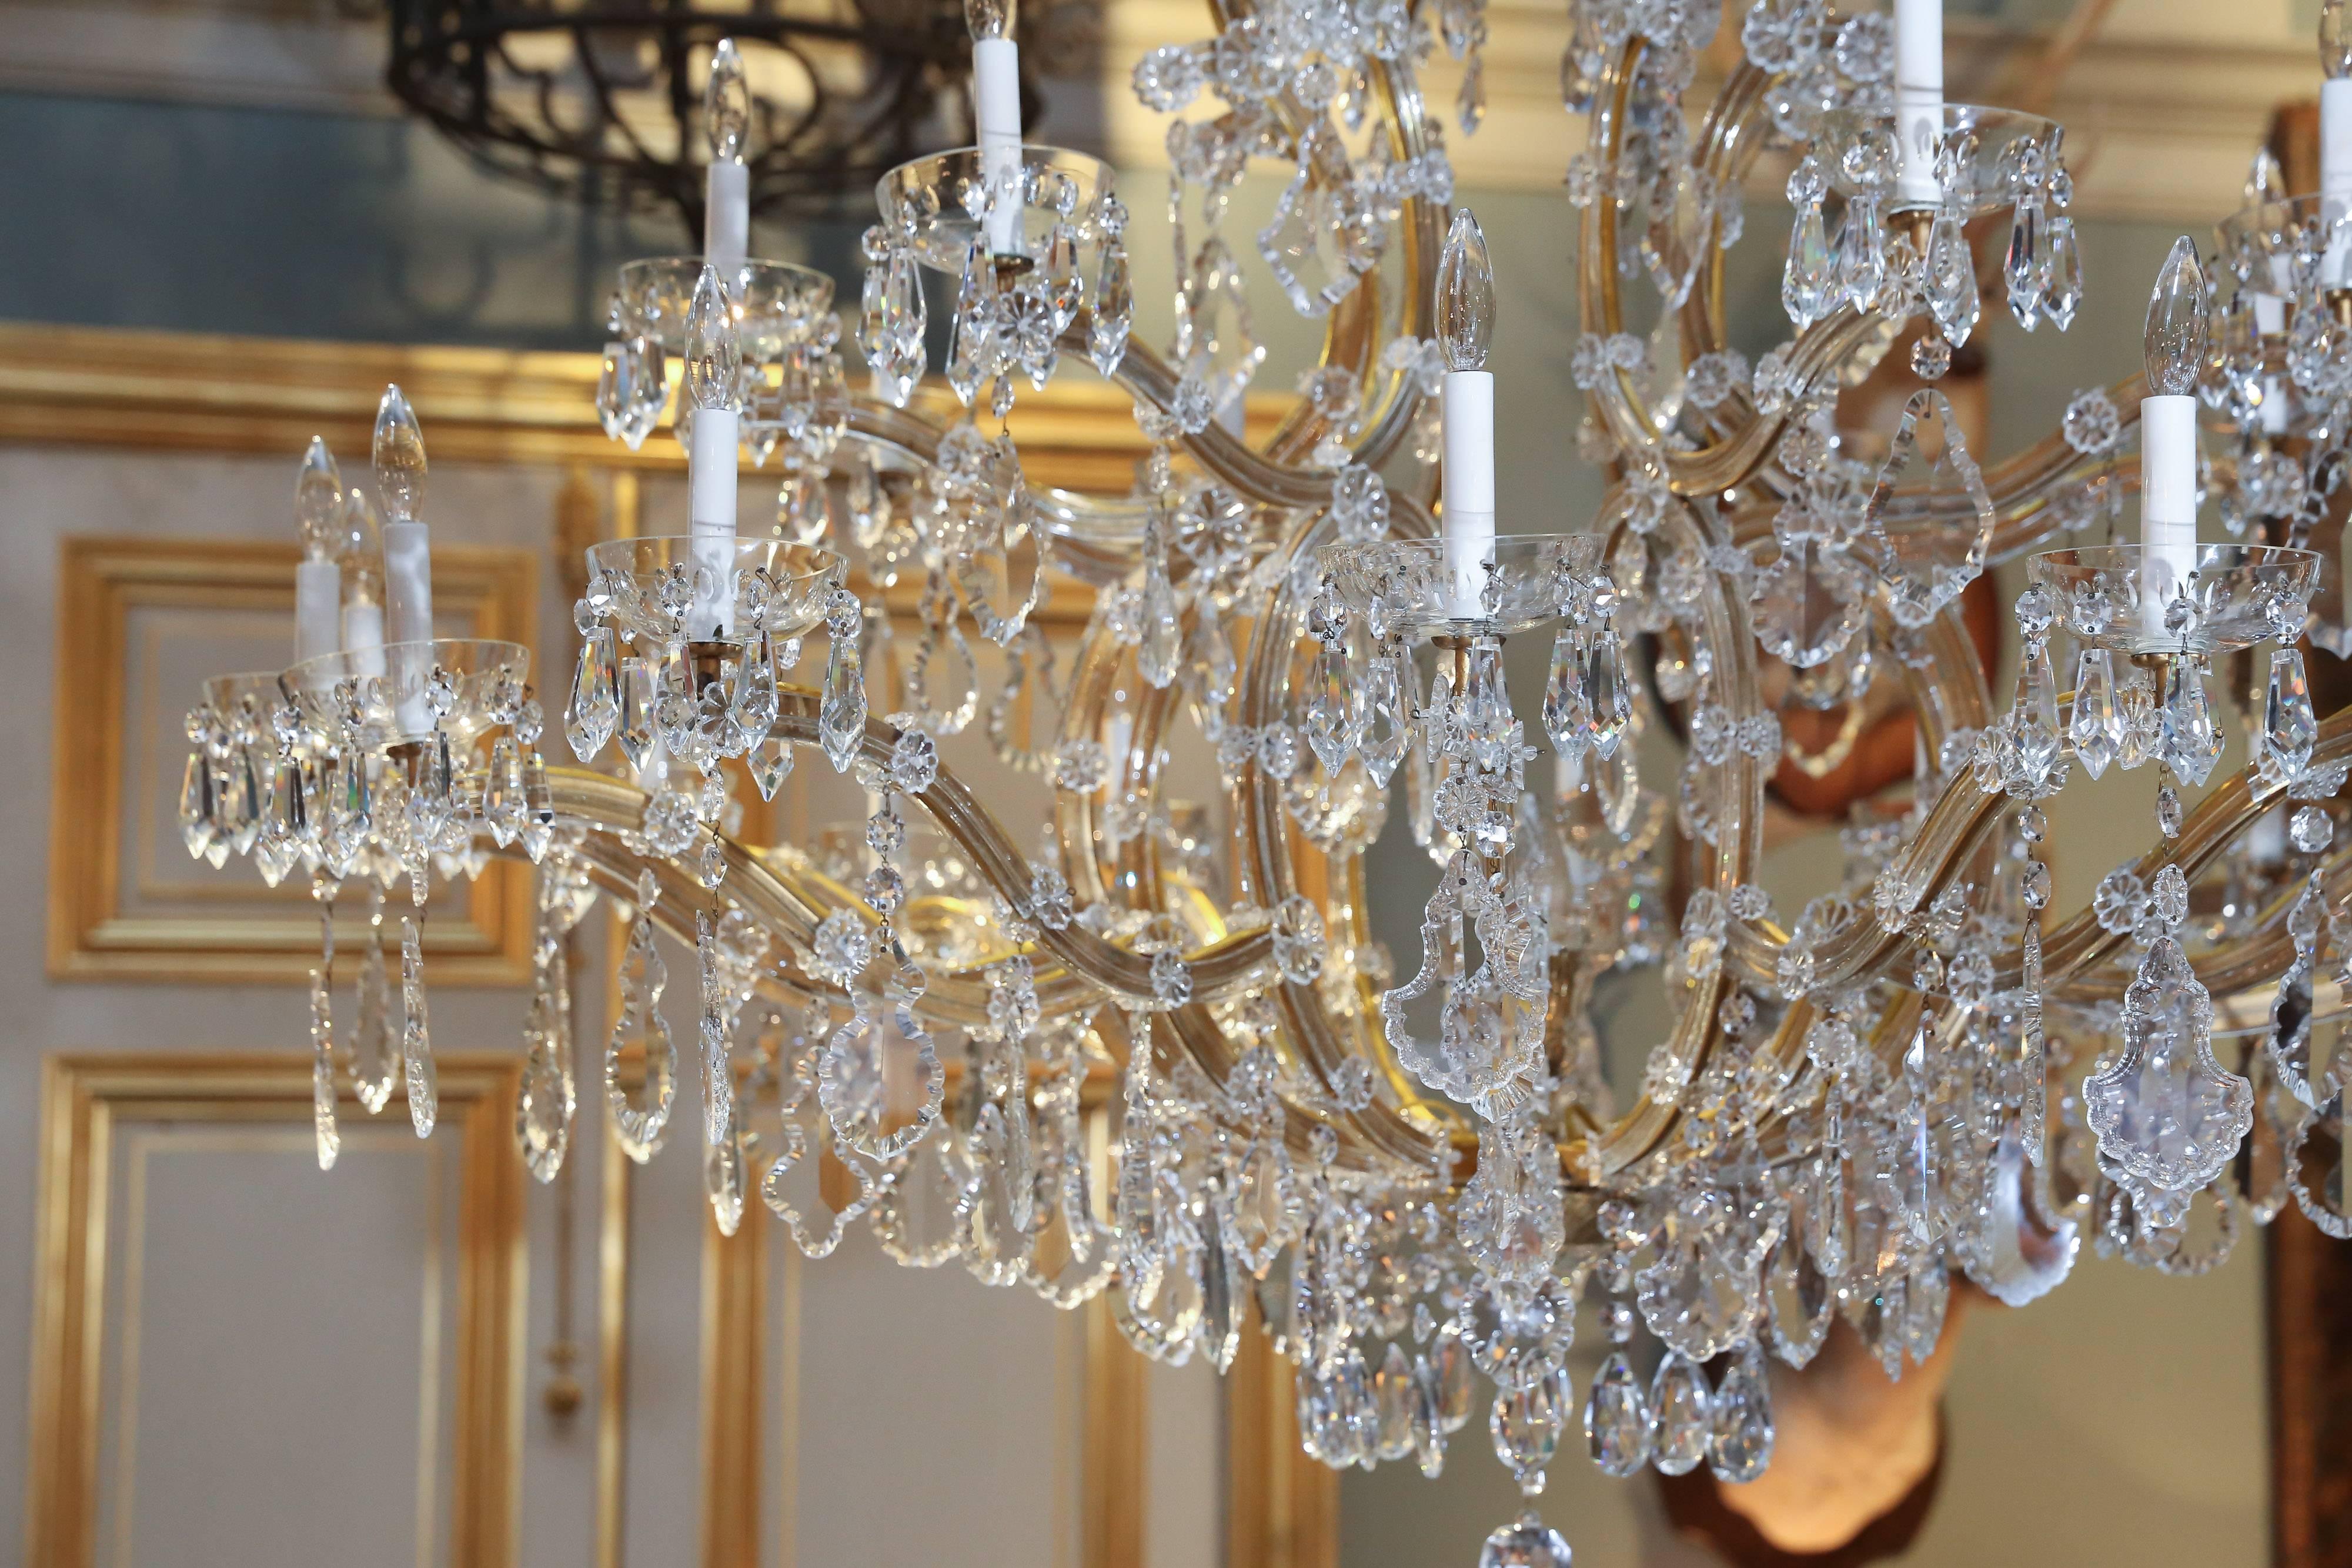 Large and very Grand Crystal Maria-Theresa Chandelier.

Chandelier has been recently rewired and cleaned.

Sparkles!

